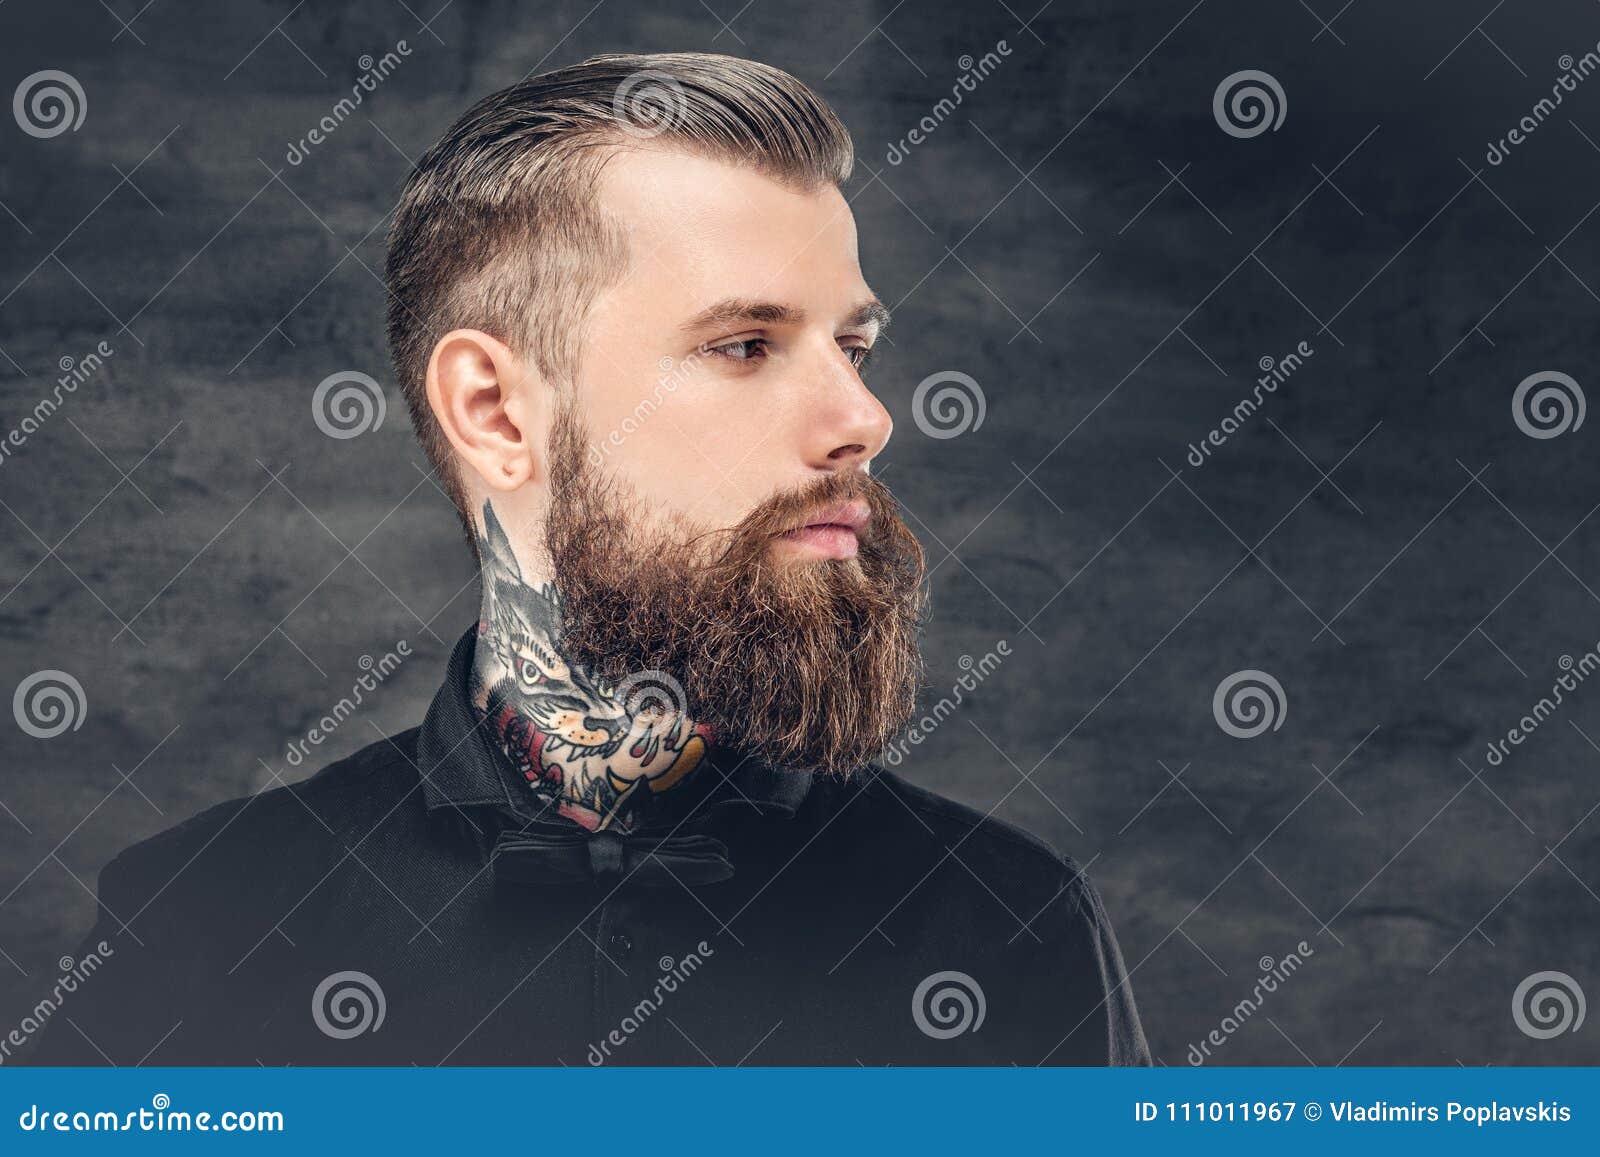 Science Explains Why Men With Beards And Tattoos Have Dating Edge